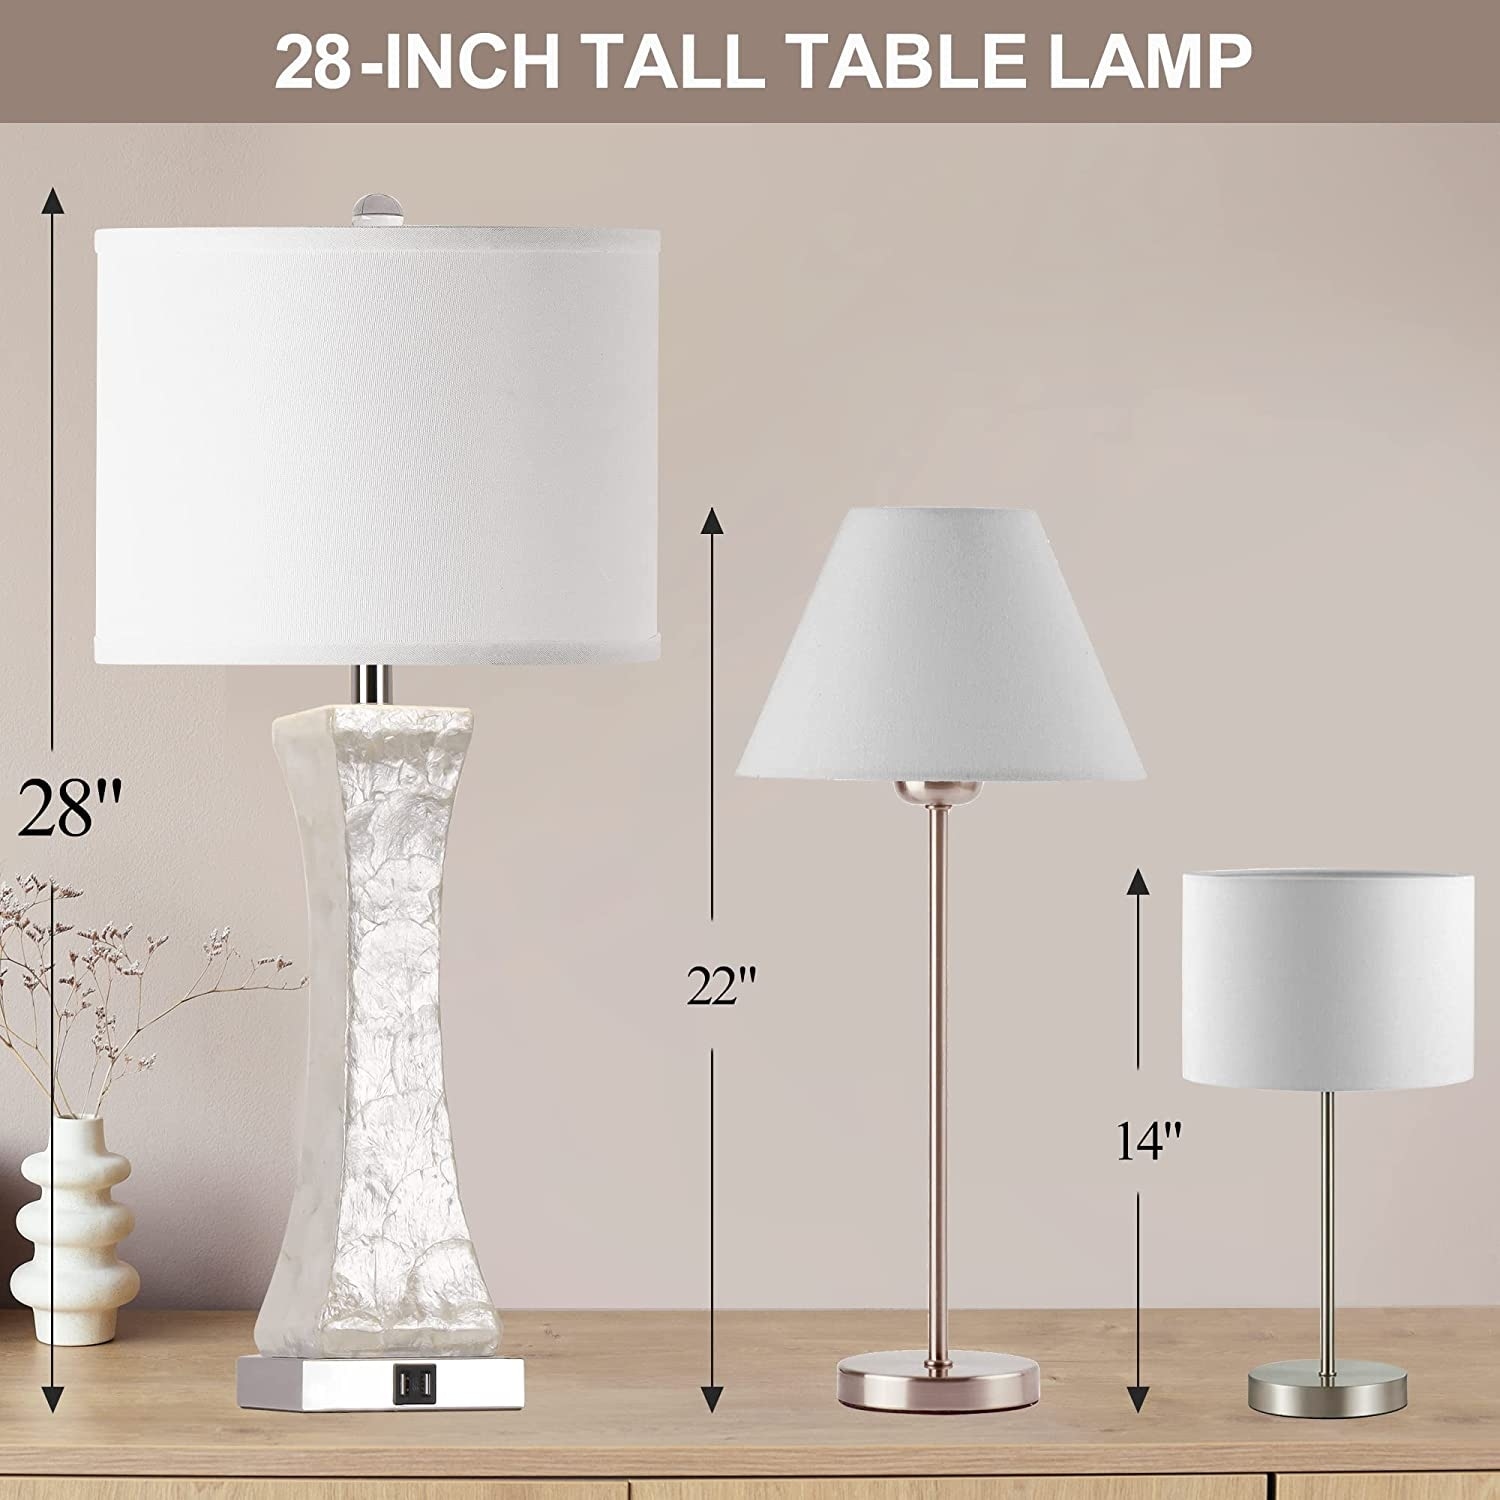 Set of Touch Control Table Lamps, 28-inch Tall Coastal White Bedside Lamp  with USB Ports, 3-Way Dimmable Capiz Shell Bed Bath  Beyond 37747288